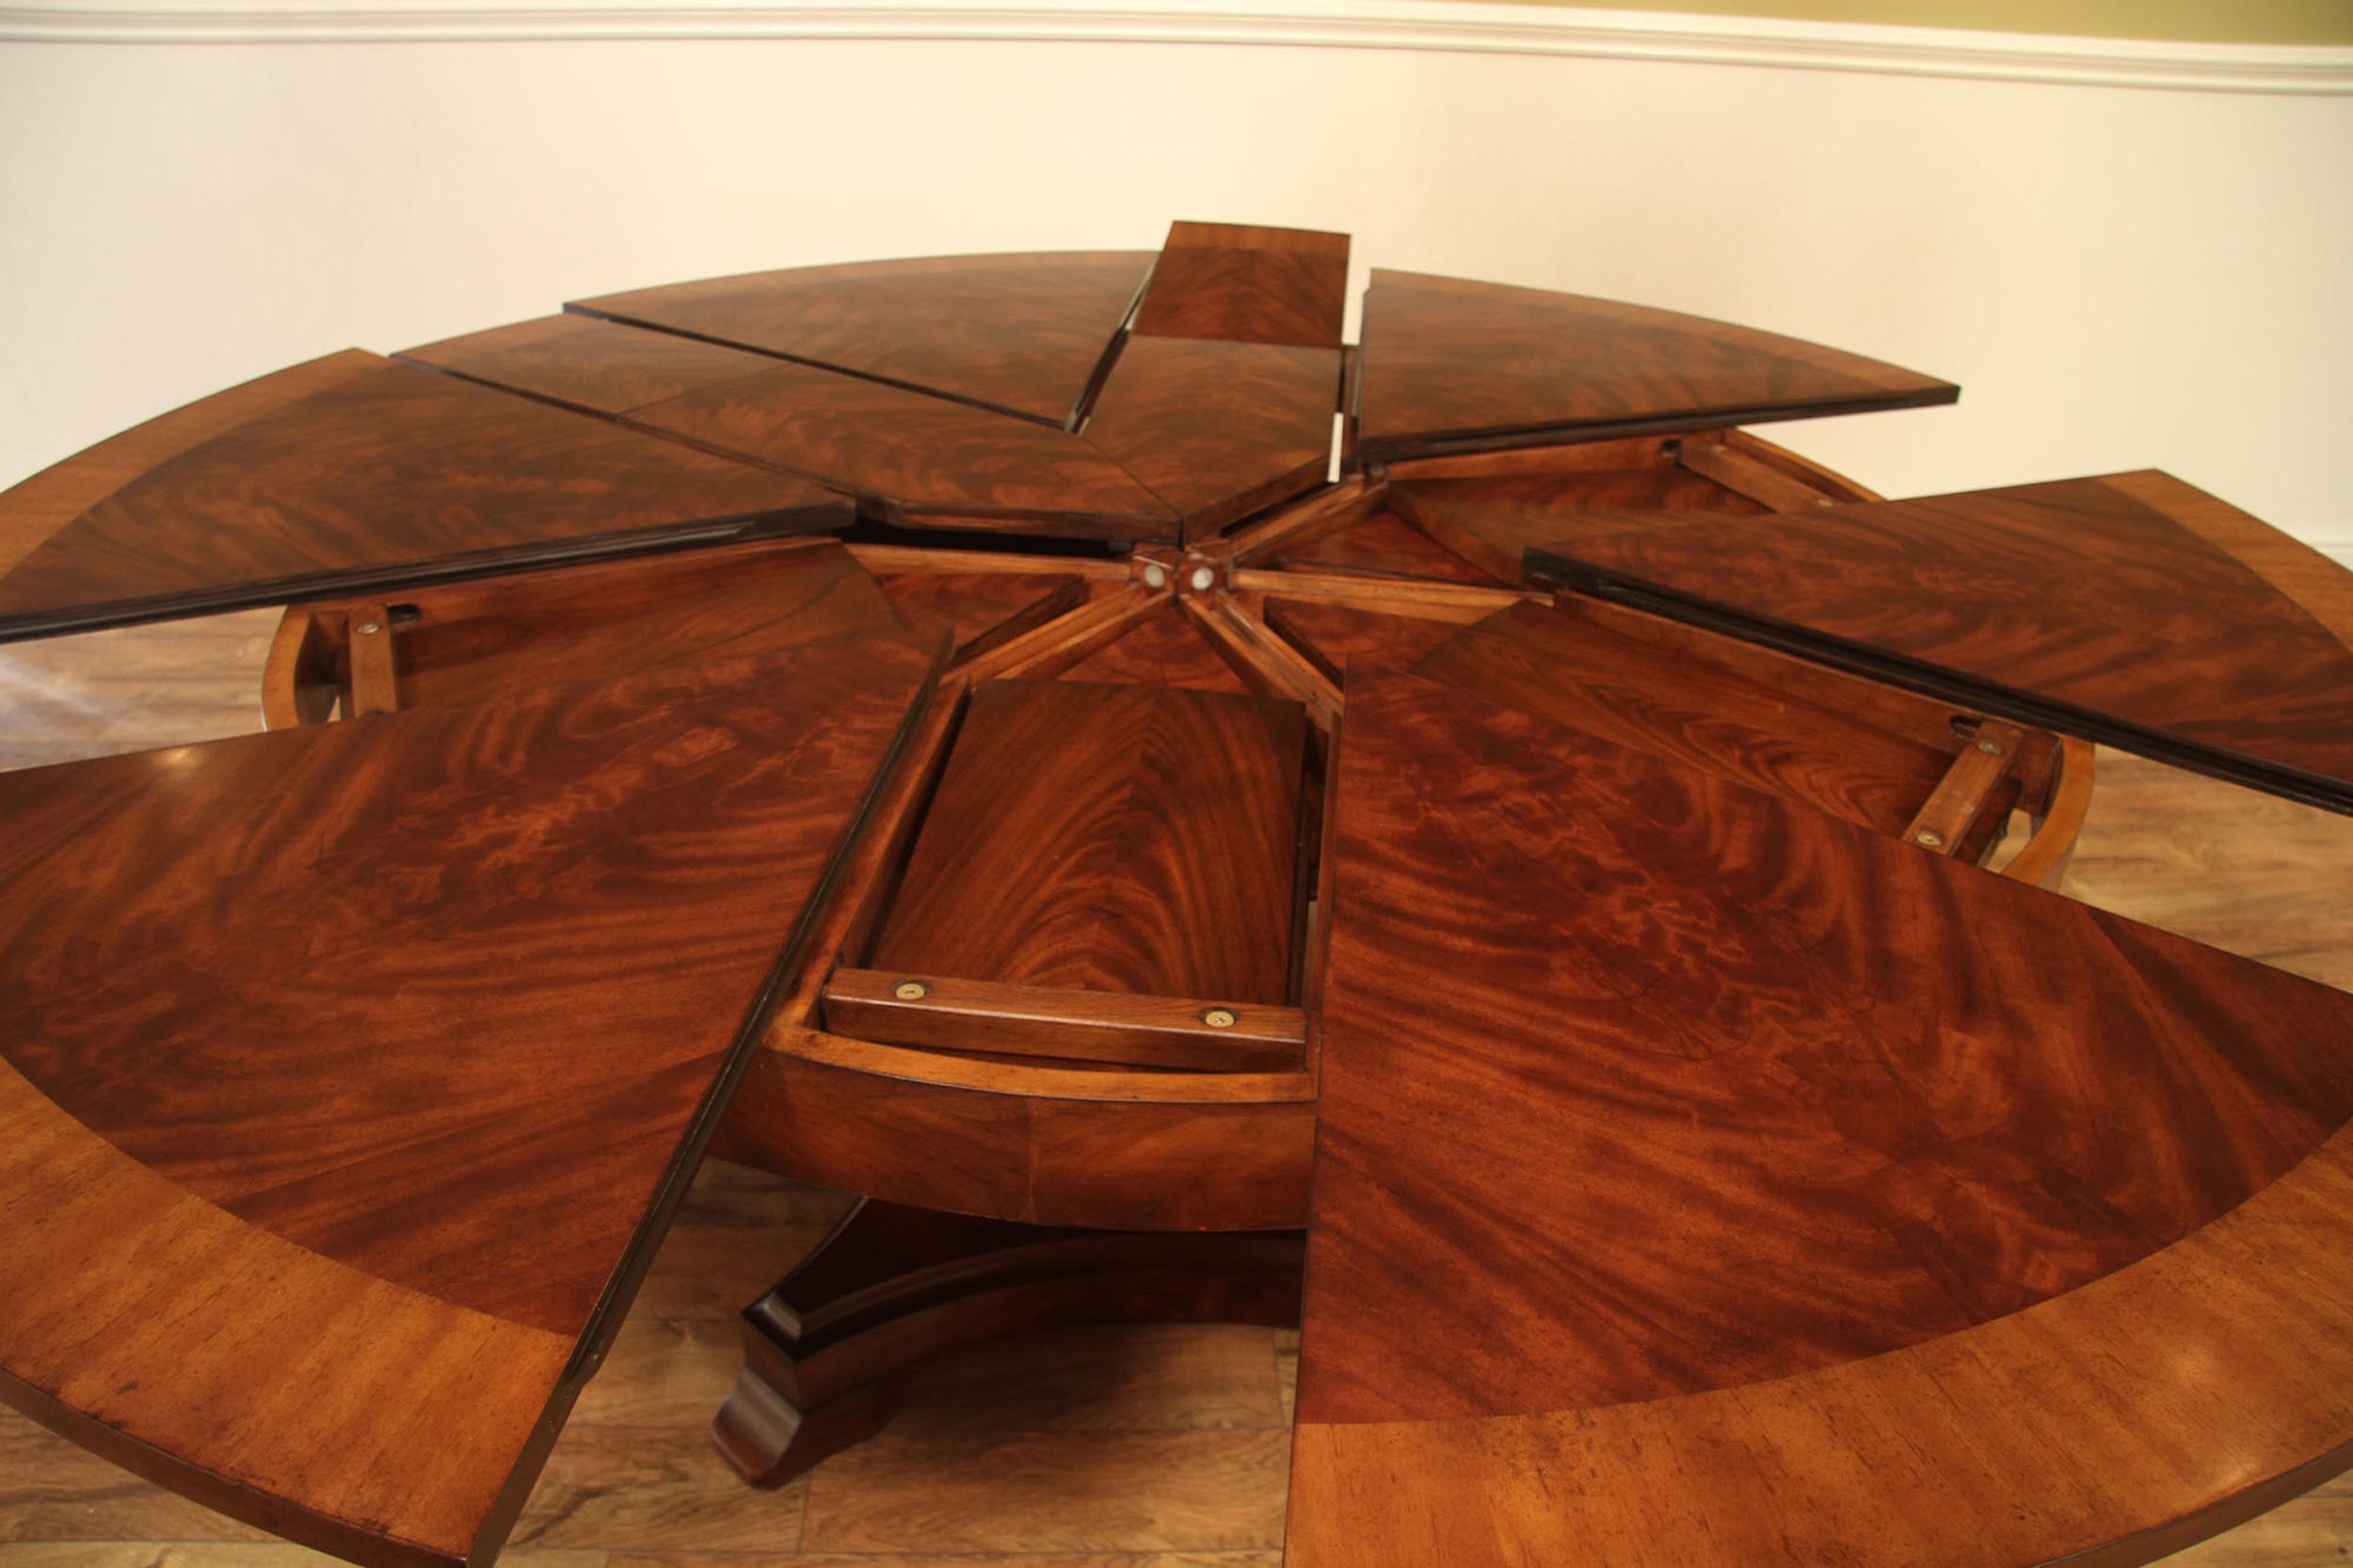 Regency Round Mahogany Jupe Dining Table by Leighton Hall